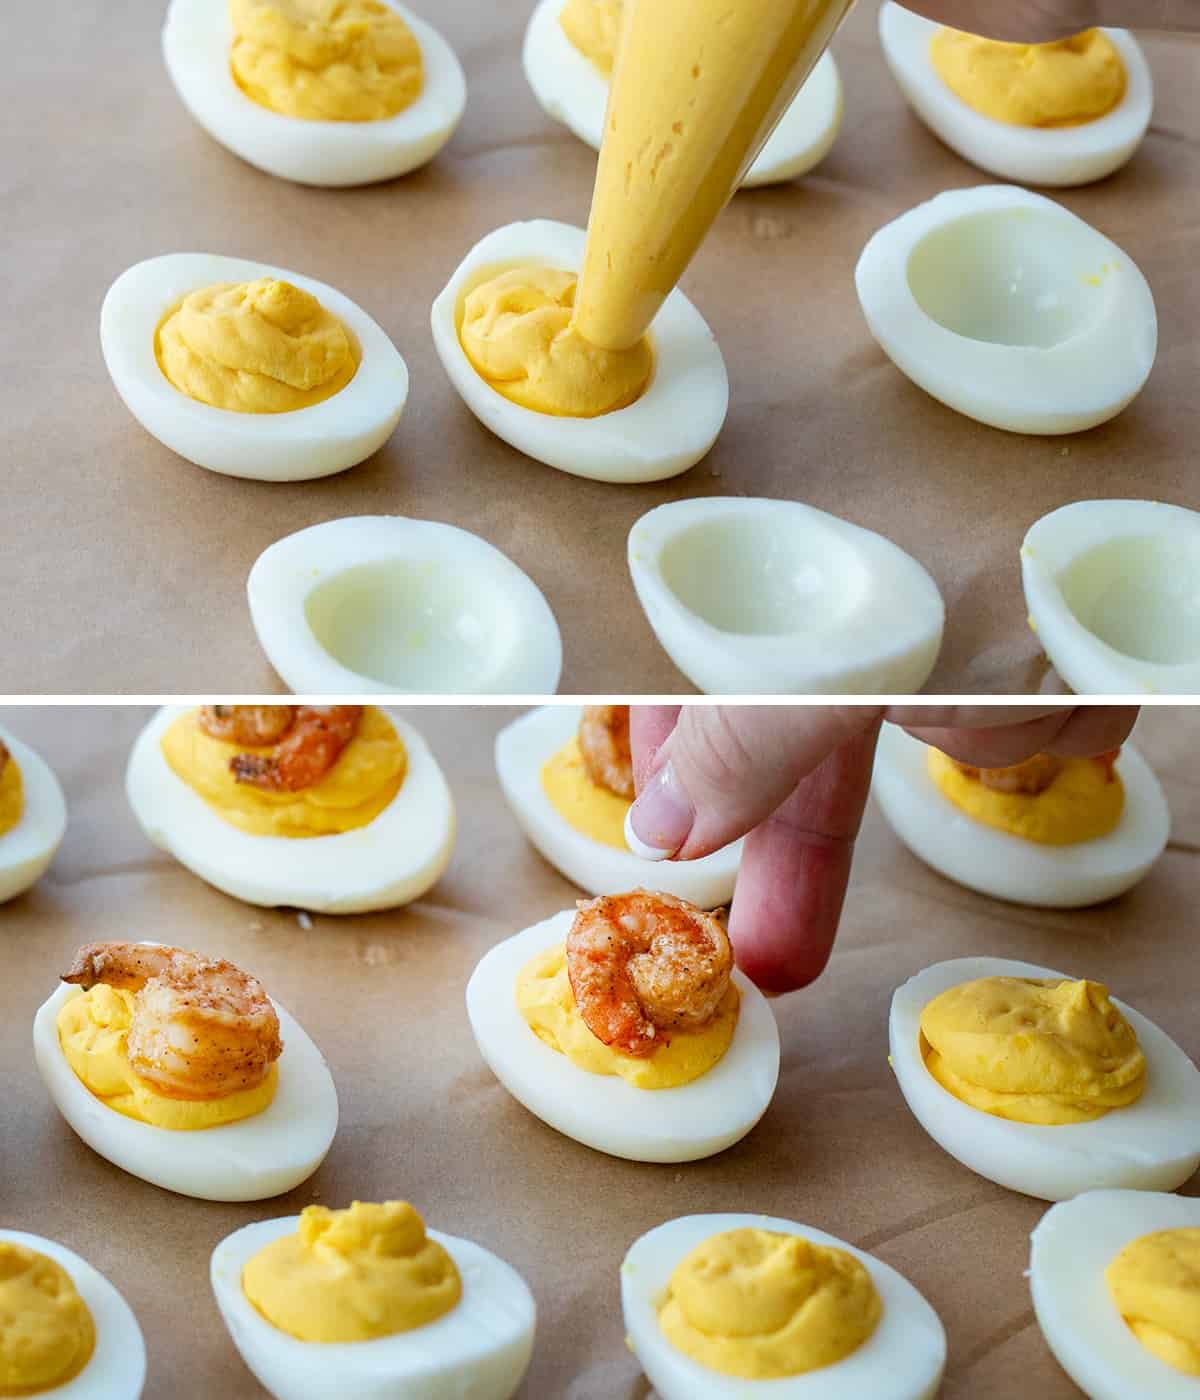 Steps for Piping Filling into Hard Boiled Eggs and Then Adding Cajun Shrimp.